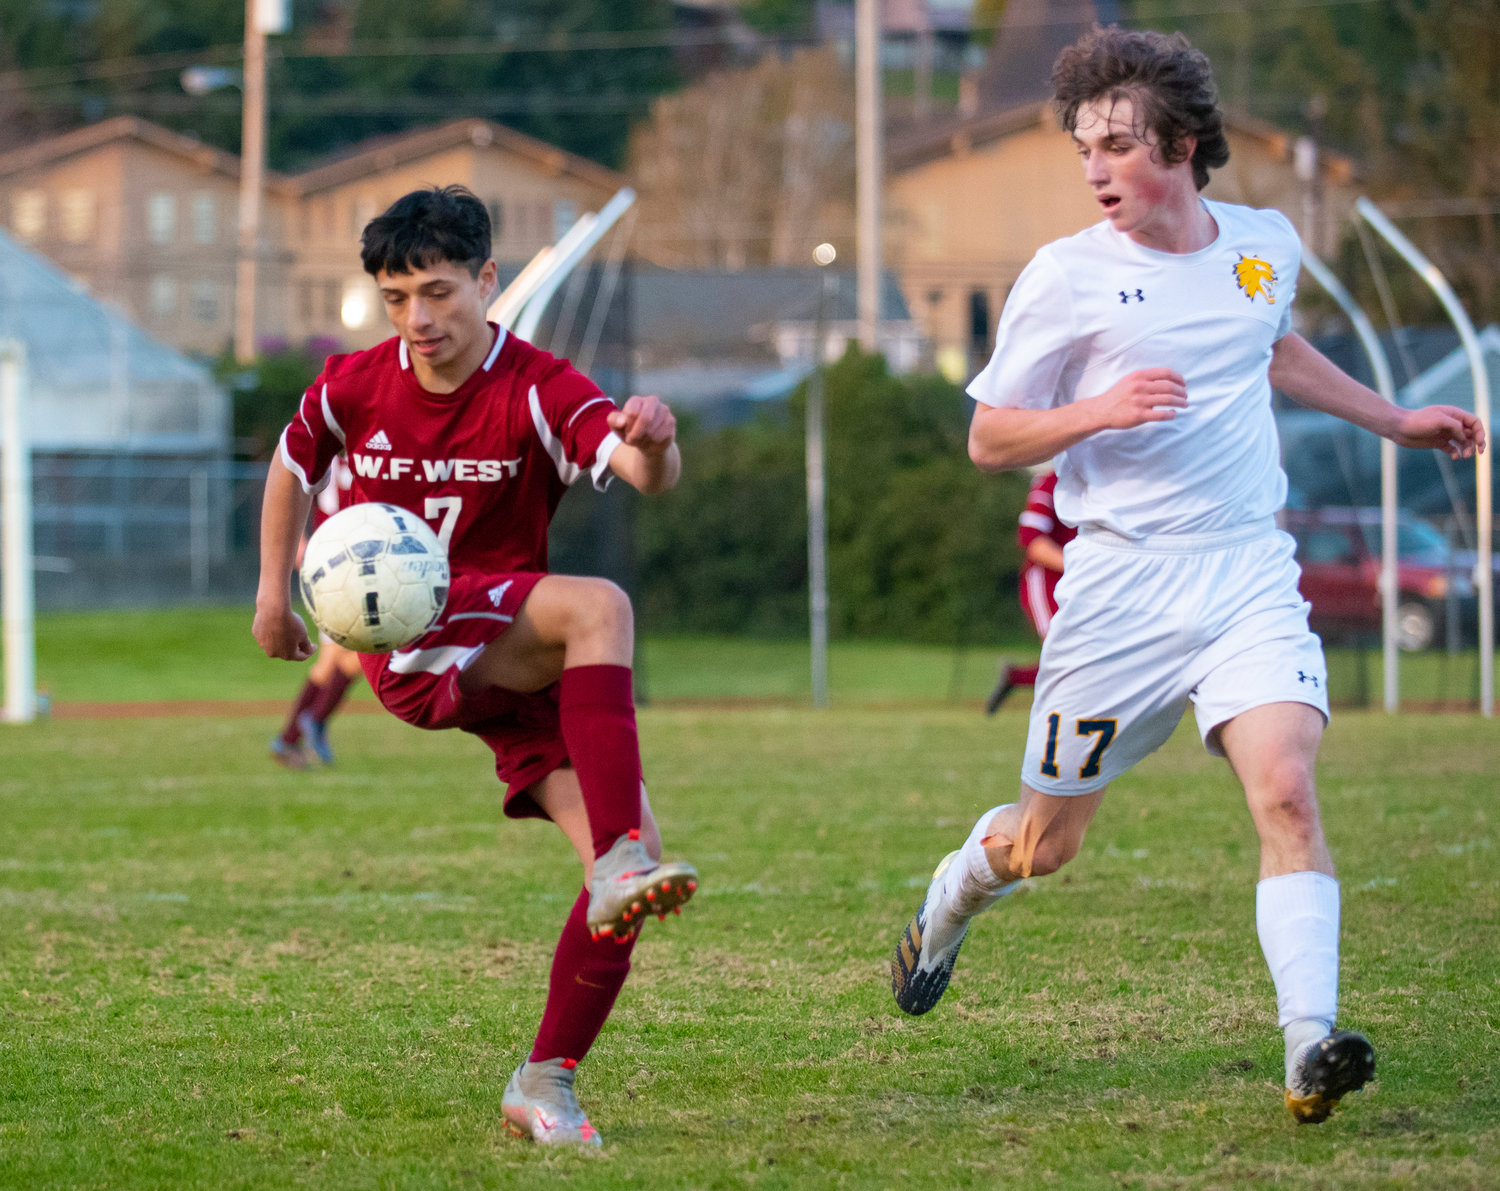 W.F. West's Saul Lima Perez (7) juggles the ball against an Aberdeen player on Tuesday at home.